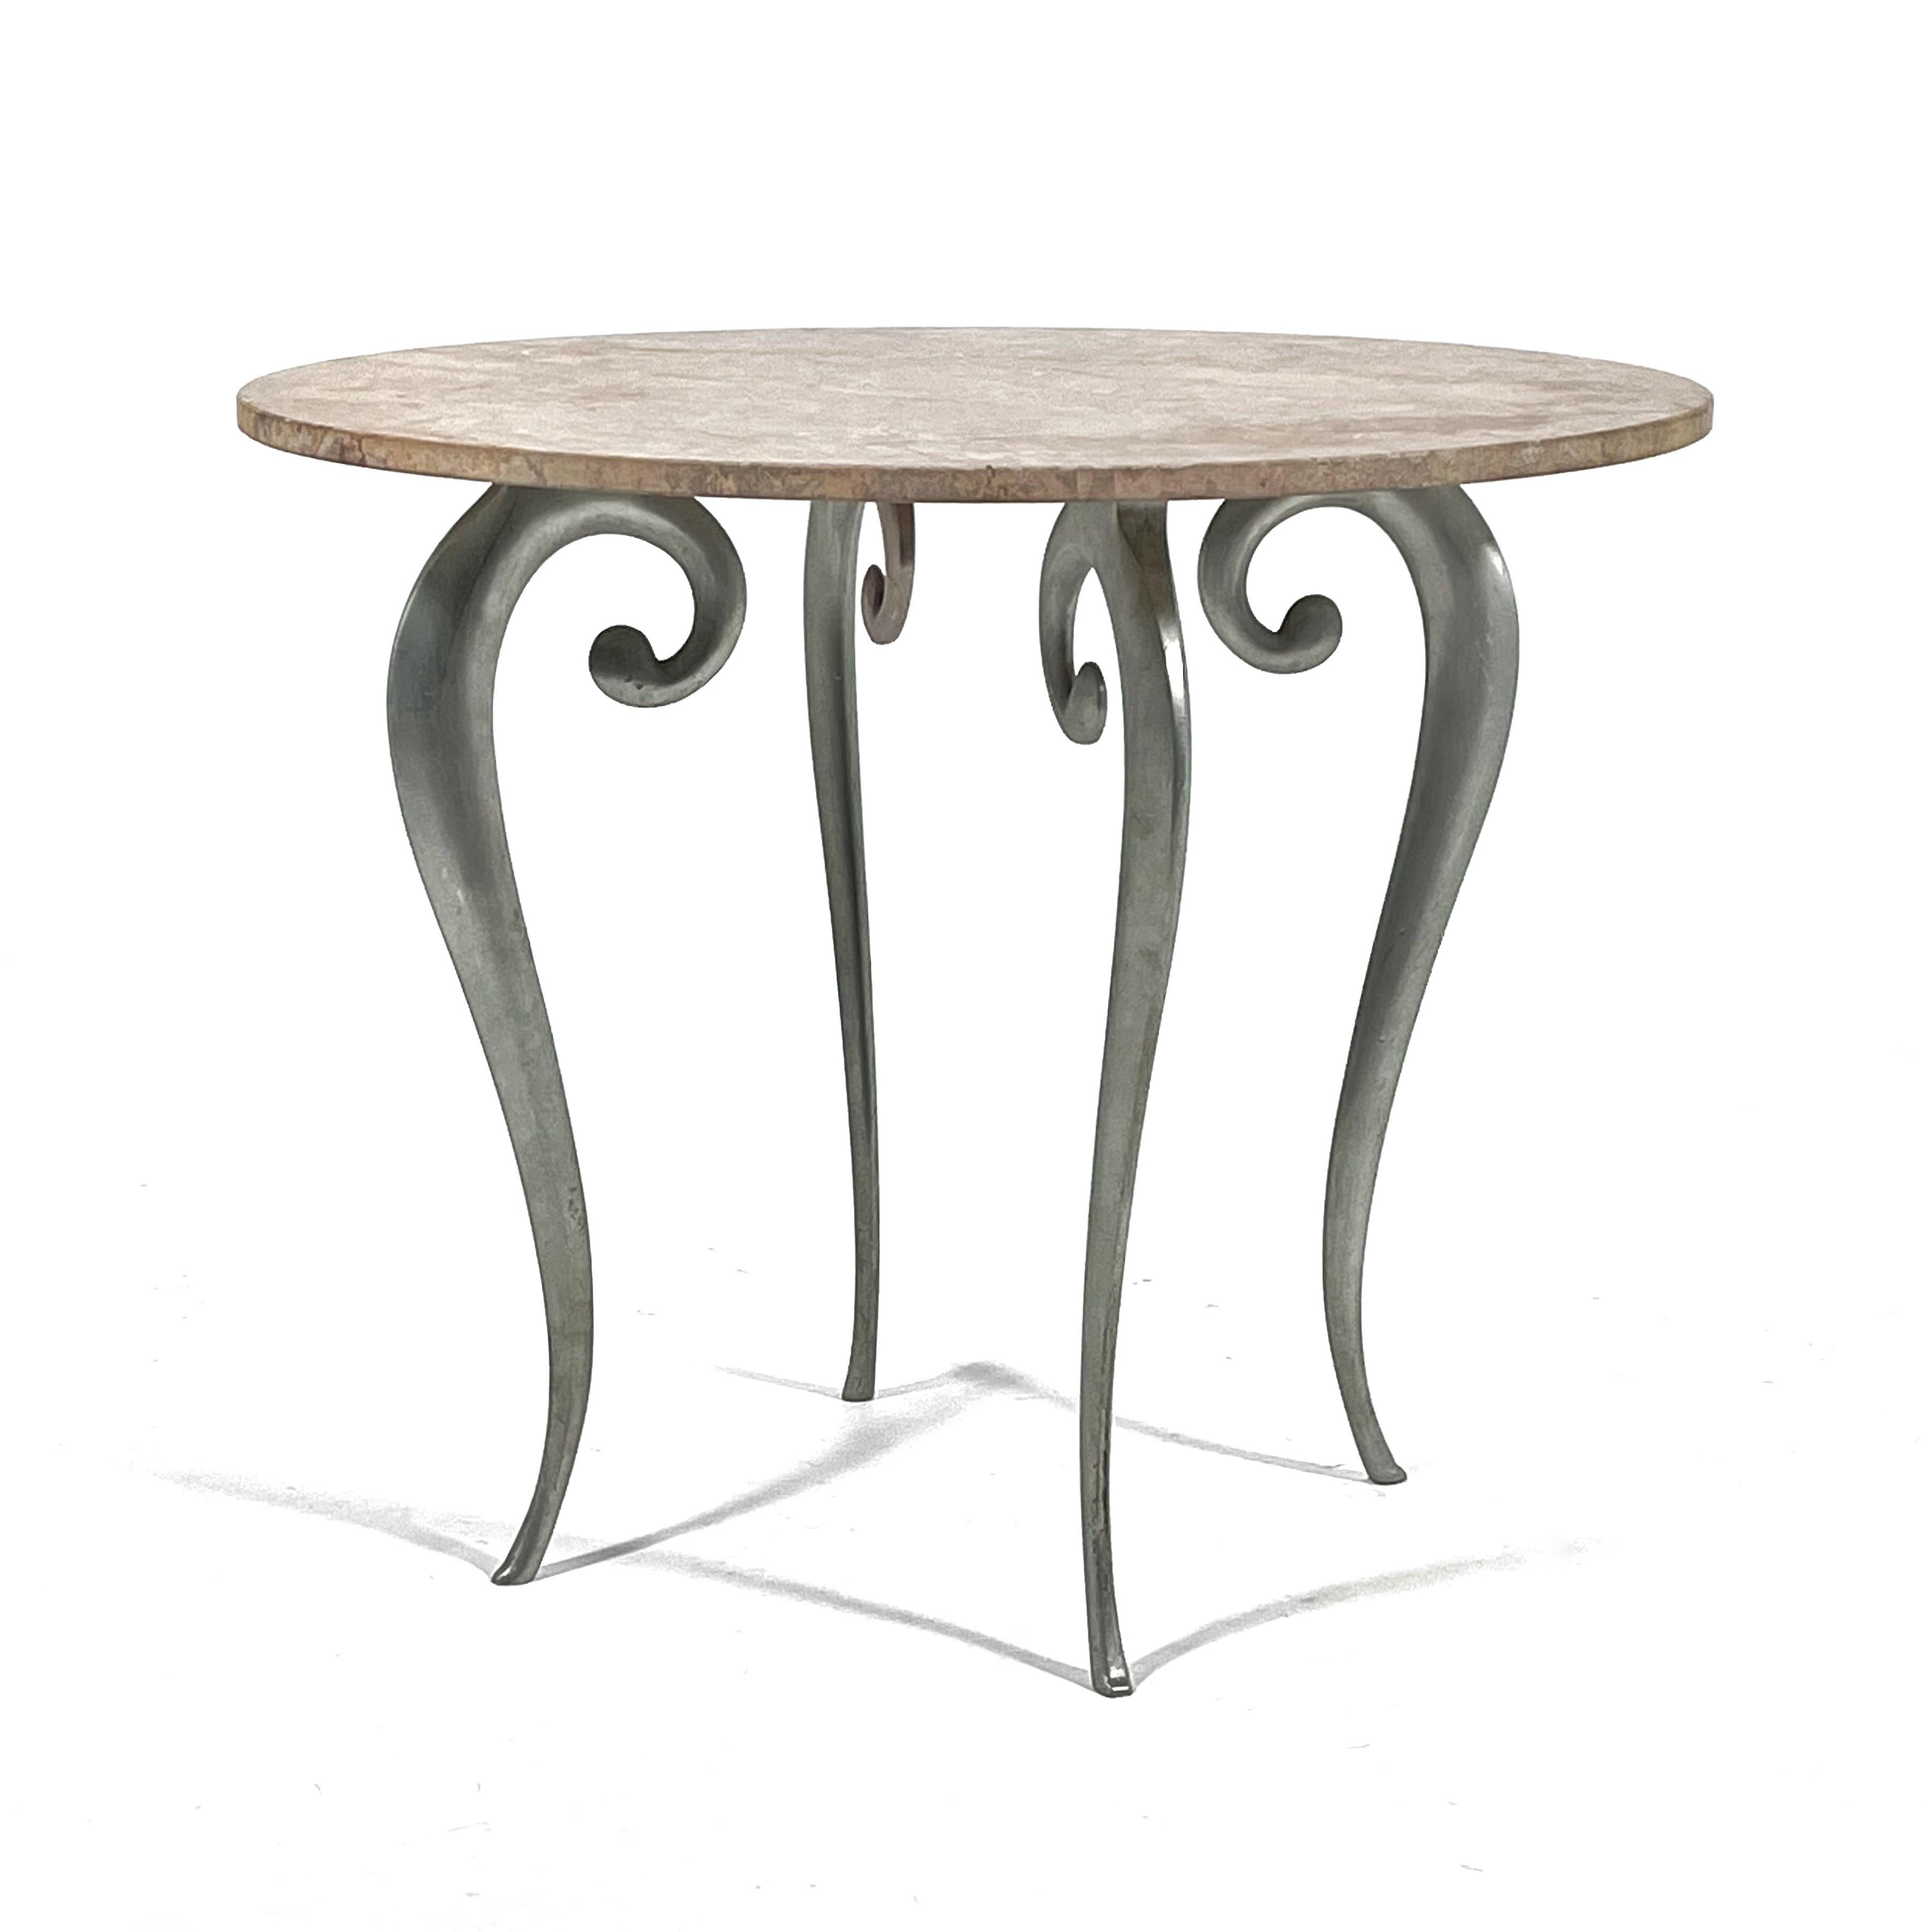 This elegant little table features a beautiful stone top with a highly figured pink and gray lunar stone and a base with cast aluminum legs. Possibly created by Judy Niedermaier,  the exuberant seahorse shaped legs are reminiscent of the work of